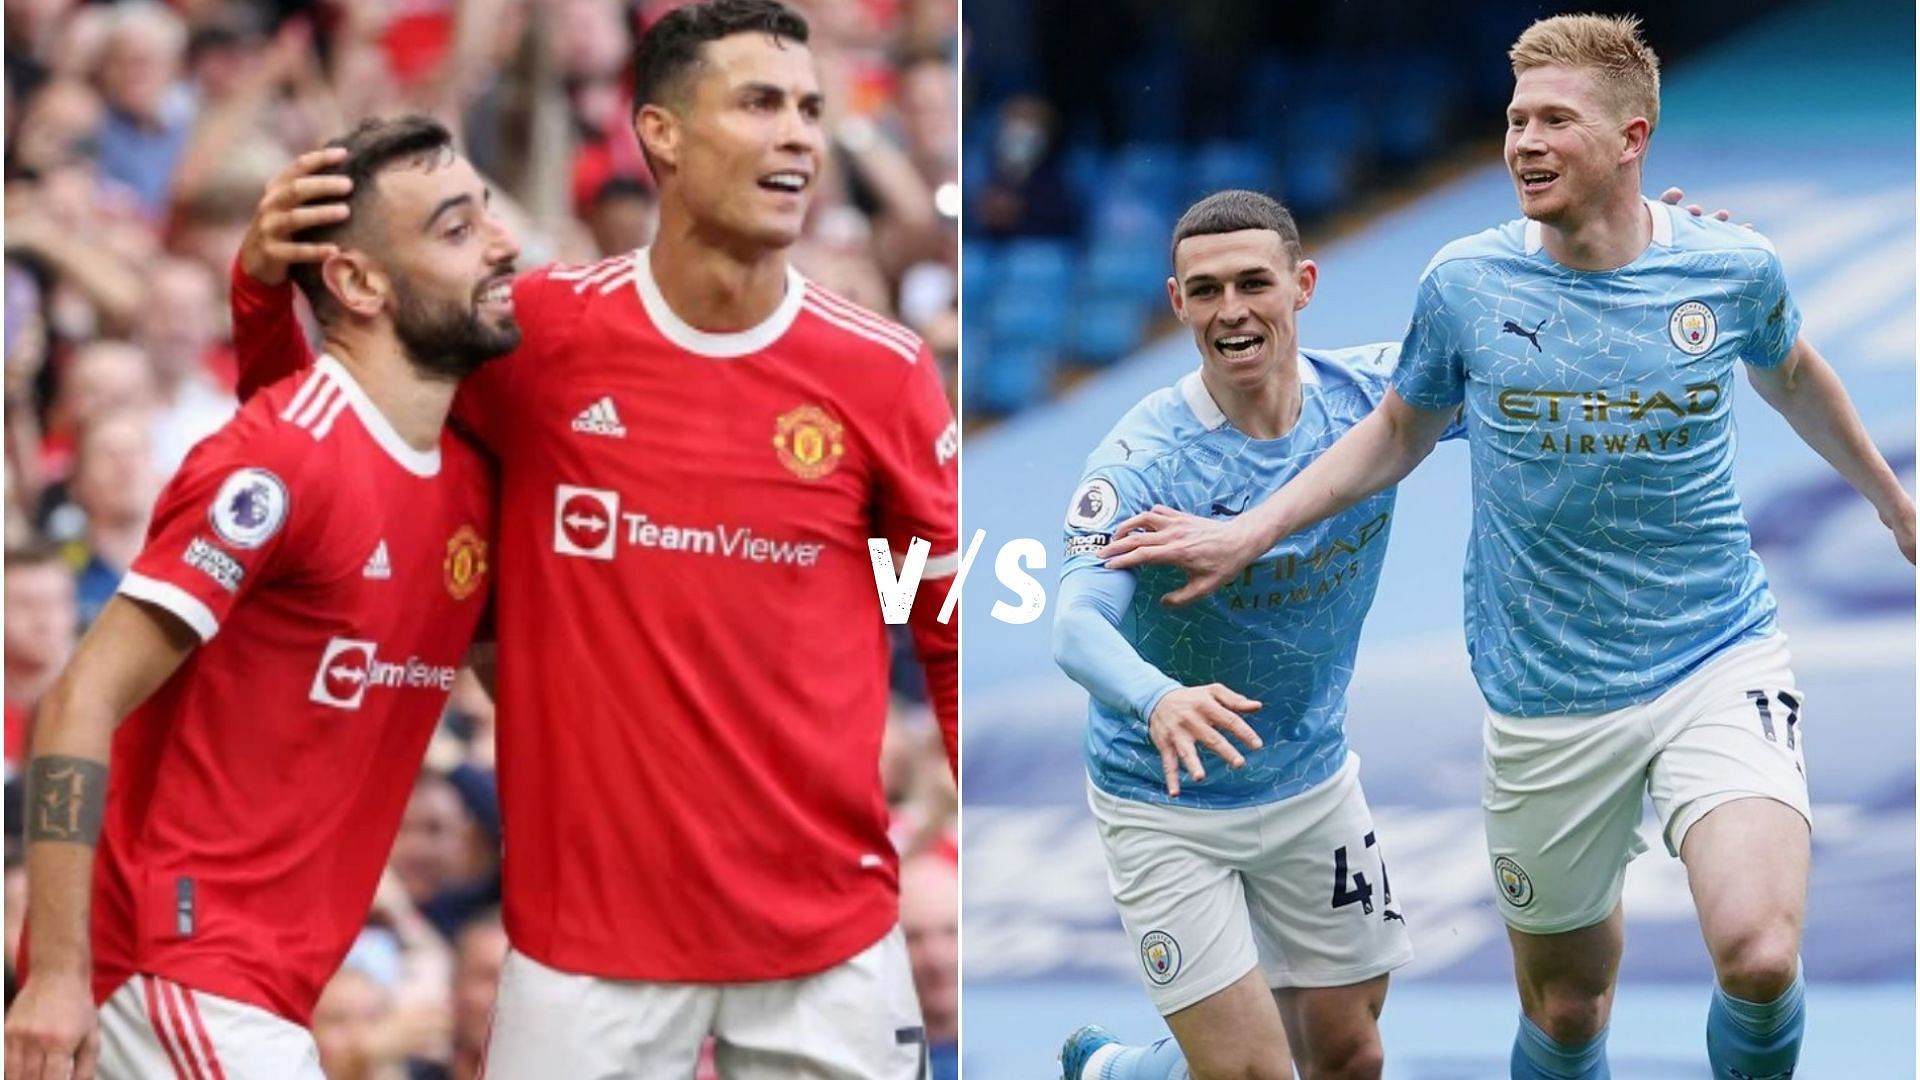 Manchester United Vs Manchester City - who has the better FIFA 22 squad? (Images via Getty)